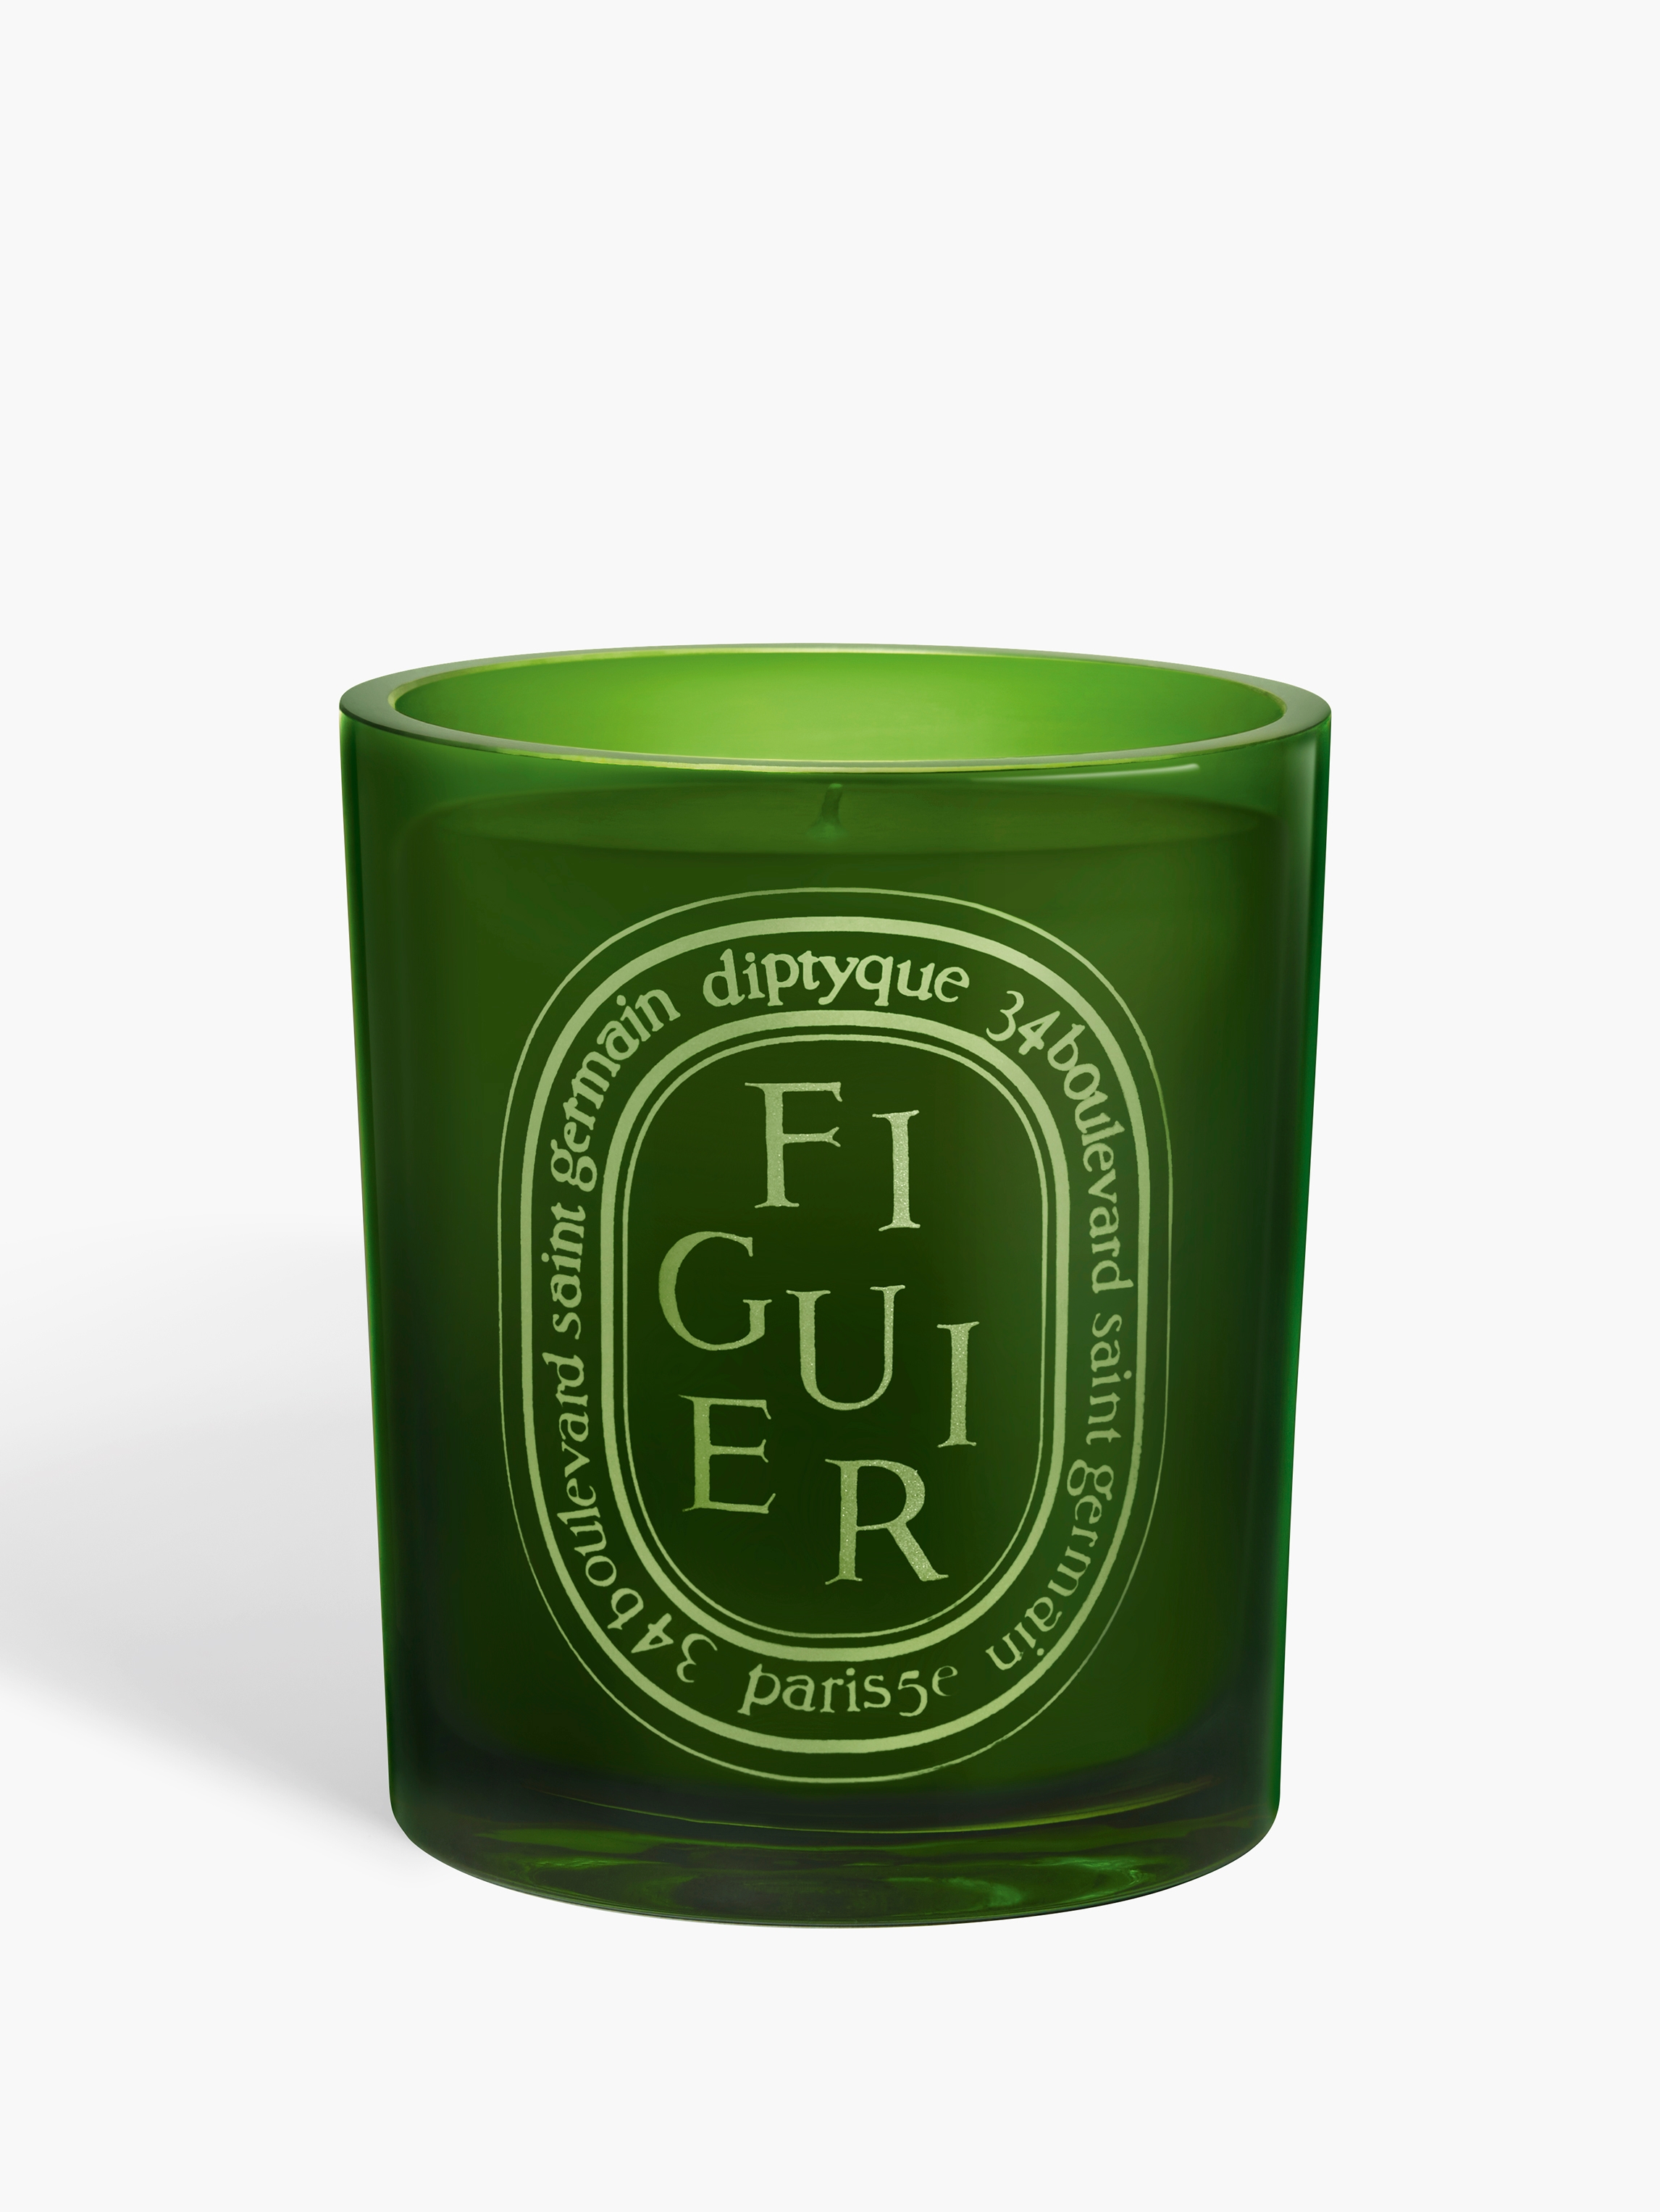 Middle Finger Shaped Gesture Diptyque Figuier Candle Creative, Quirky, And  Niche Home Decor Ornaments Perfect Birthday Gift Z0418 From Make04, $7.02